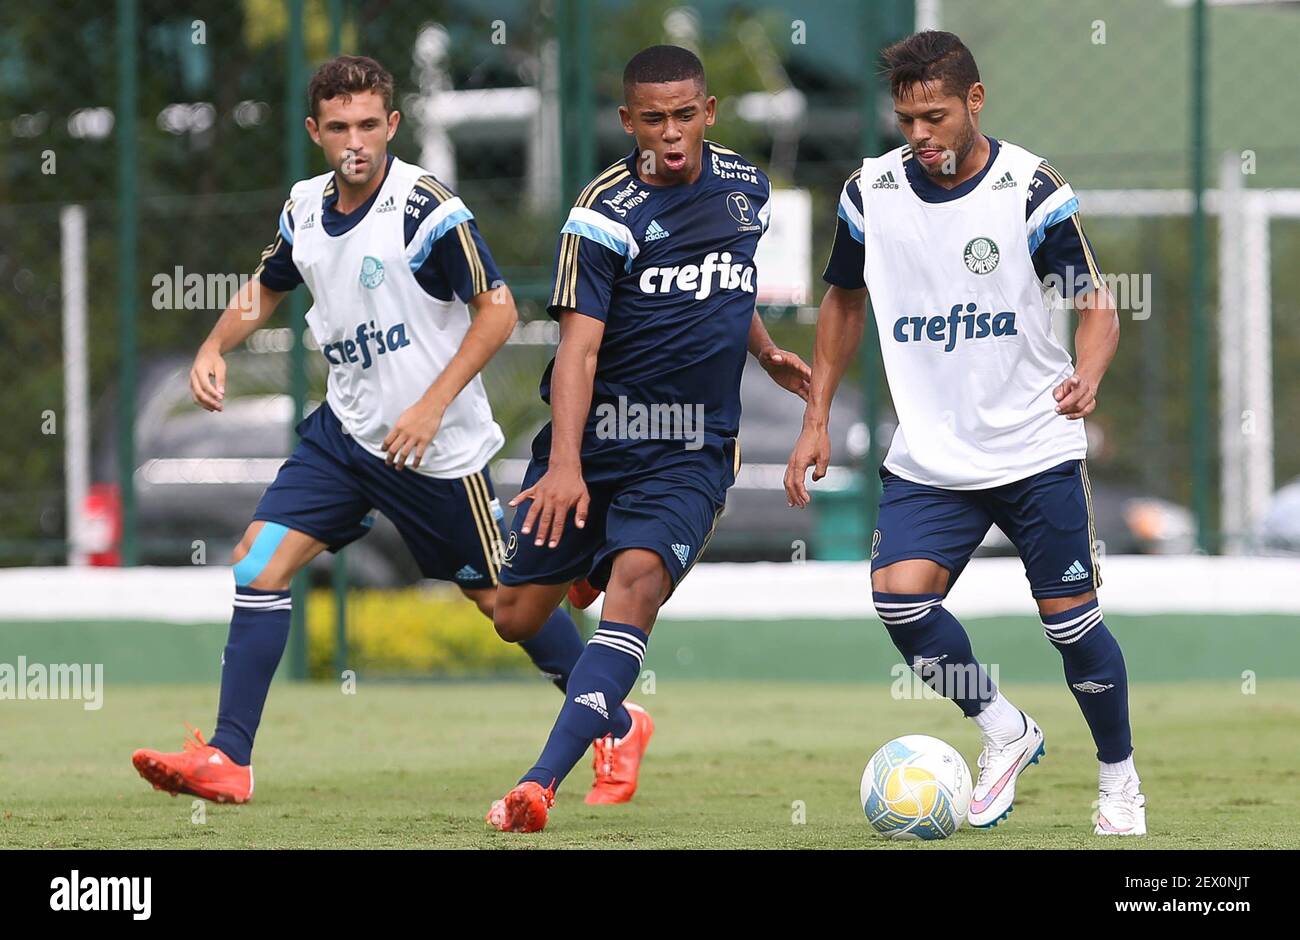 Players Allione, Gabriel Jesus and JoÃ£o Paulo (l/r) of the SE Palmeiras,  during training at the Academy of Football, in the neighborhood of Barra  Funda. SÃ£o Paulo/SP, Brazil-2/20/2015. Photo: Cesar Greco/Fotoarena Os